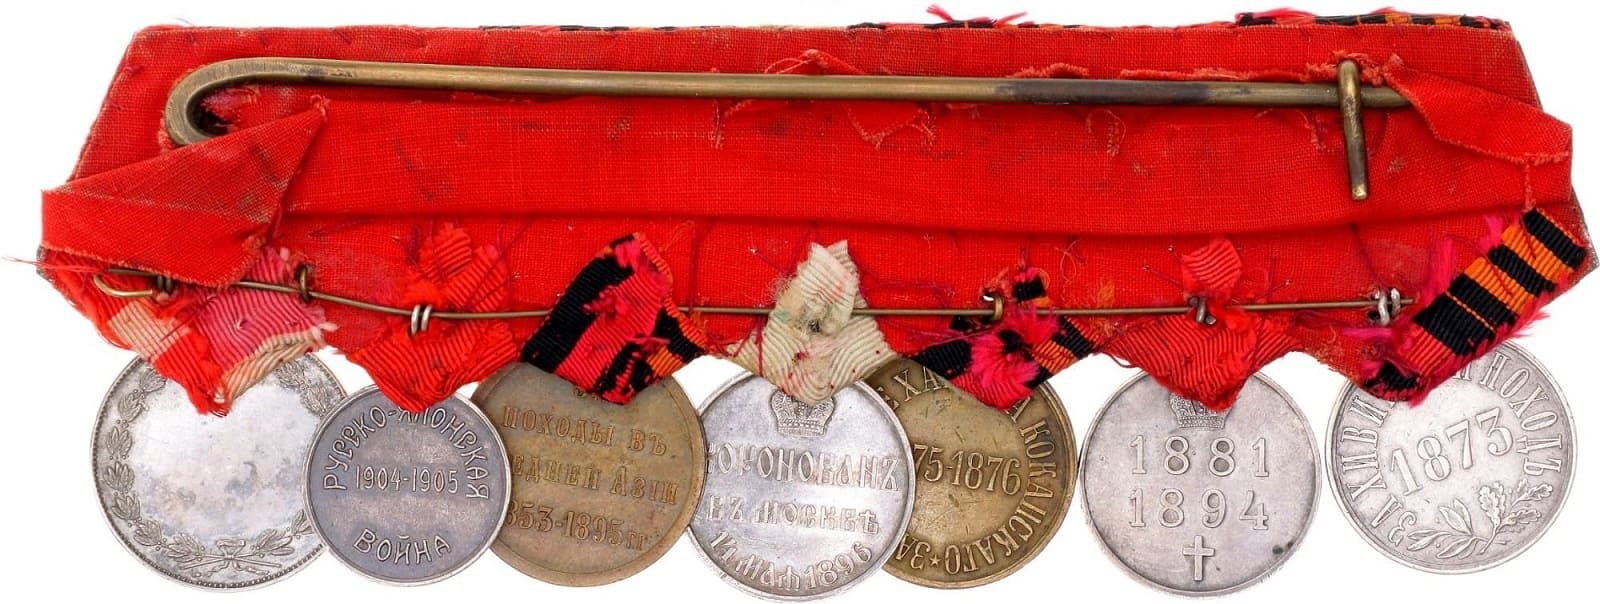 Medal Bar of Footman 2nd class of the Imperial Winter Palace Karl Ivanov Ekdender.jpg